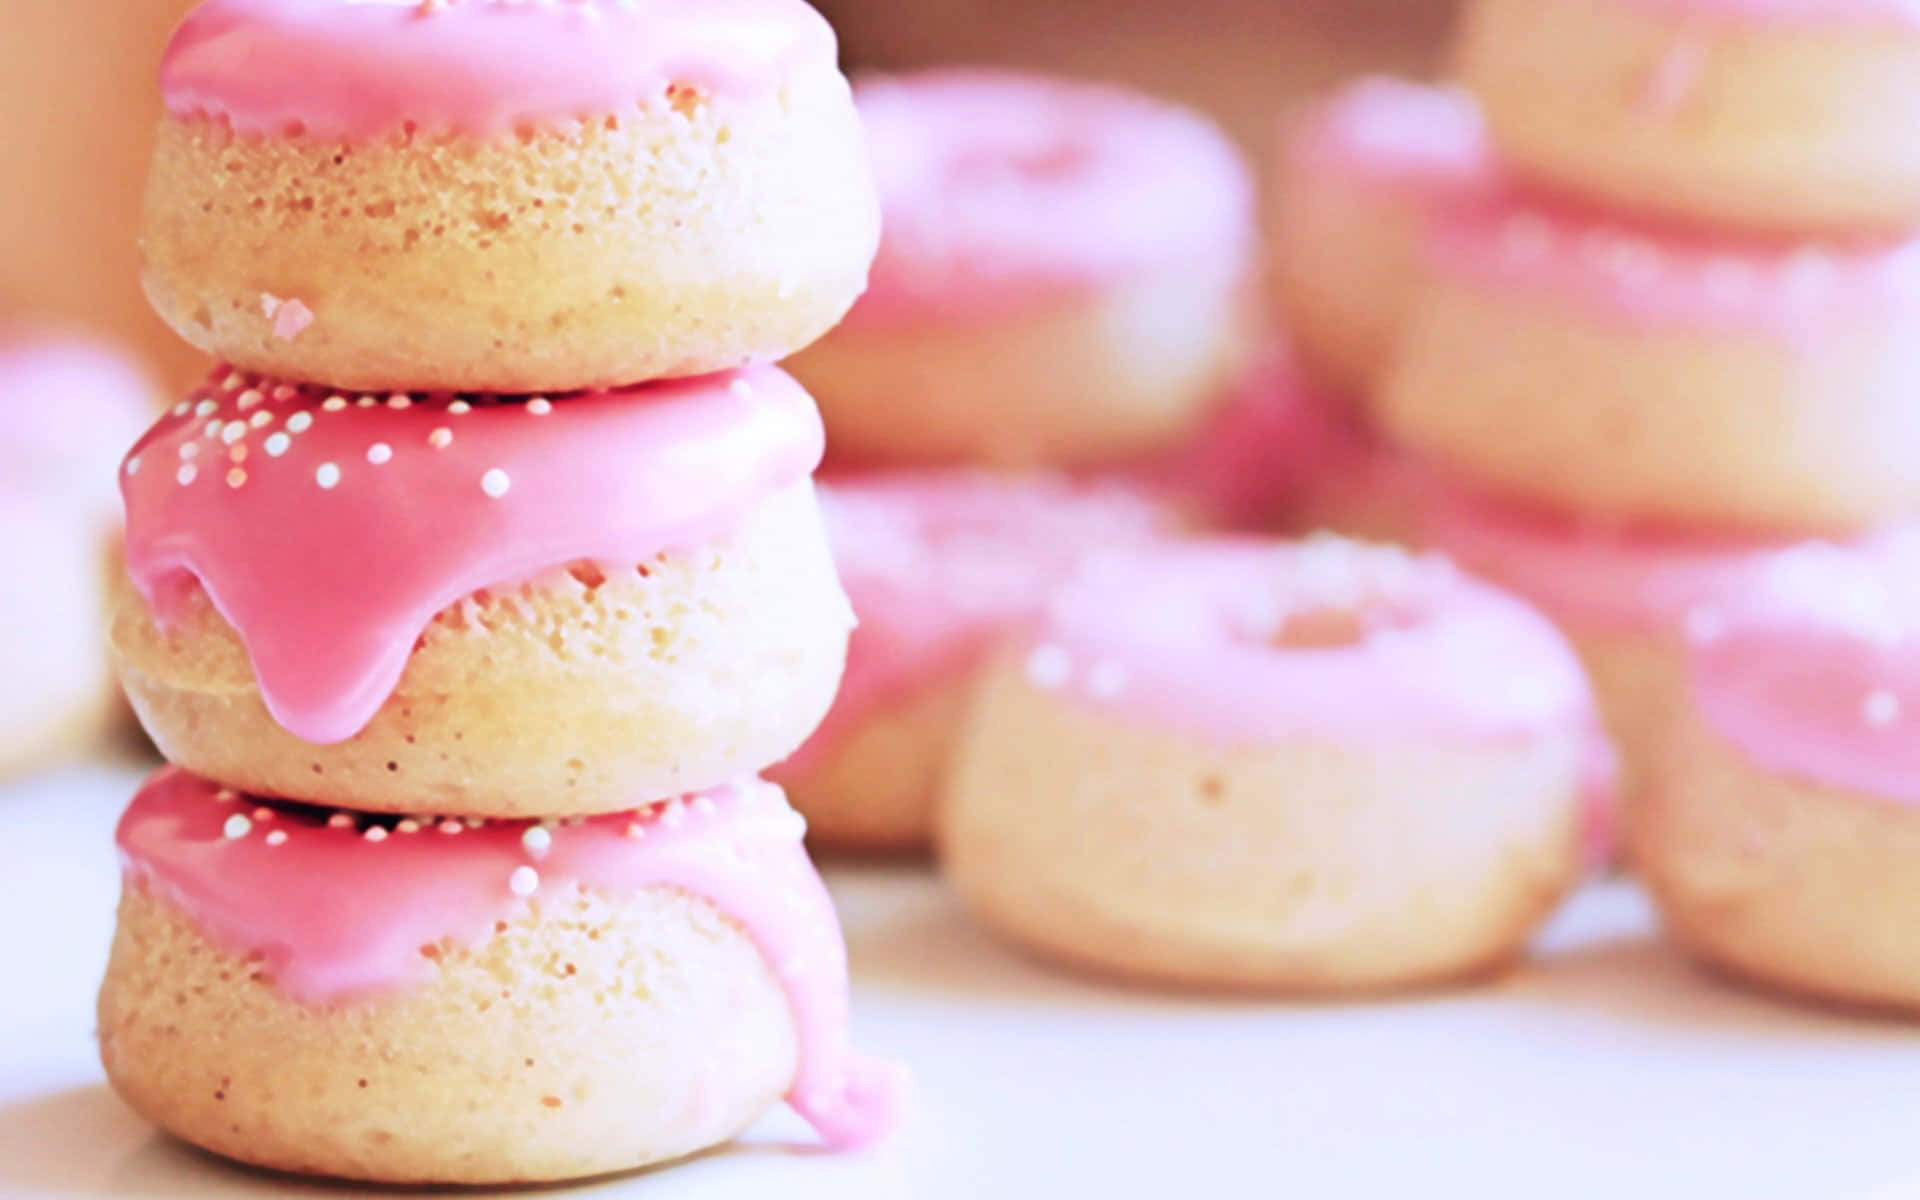 Adorable Donut with Sprinkles and Smiley Face Wallpaper